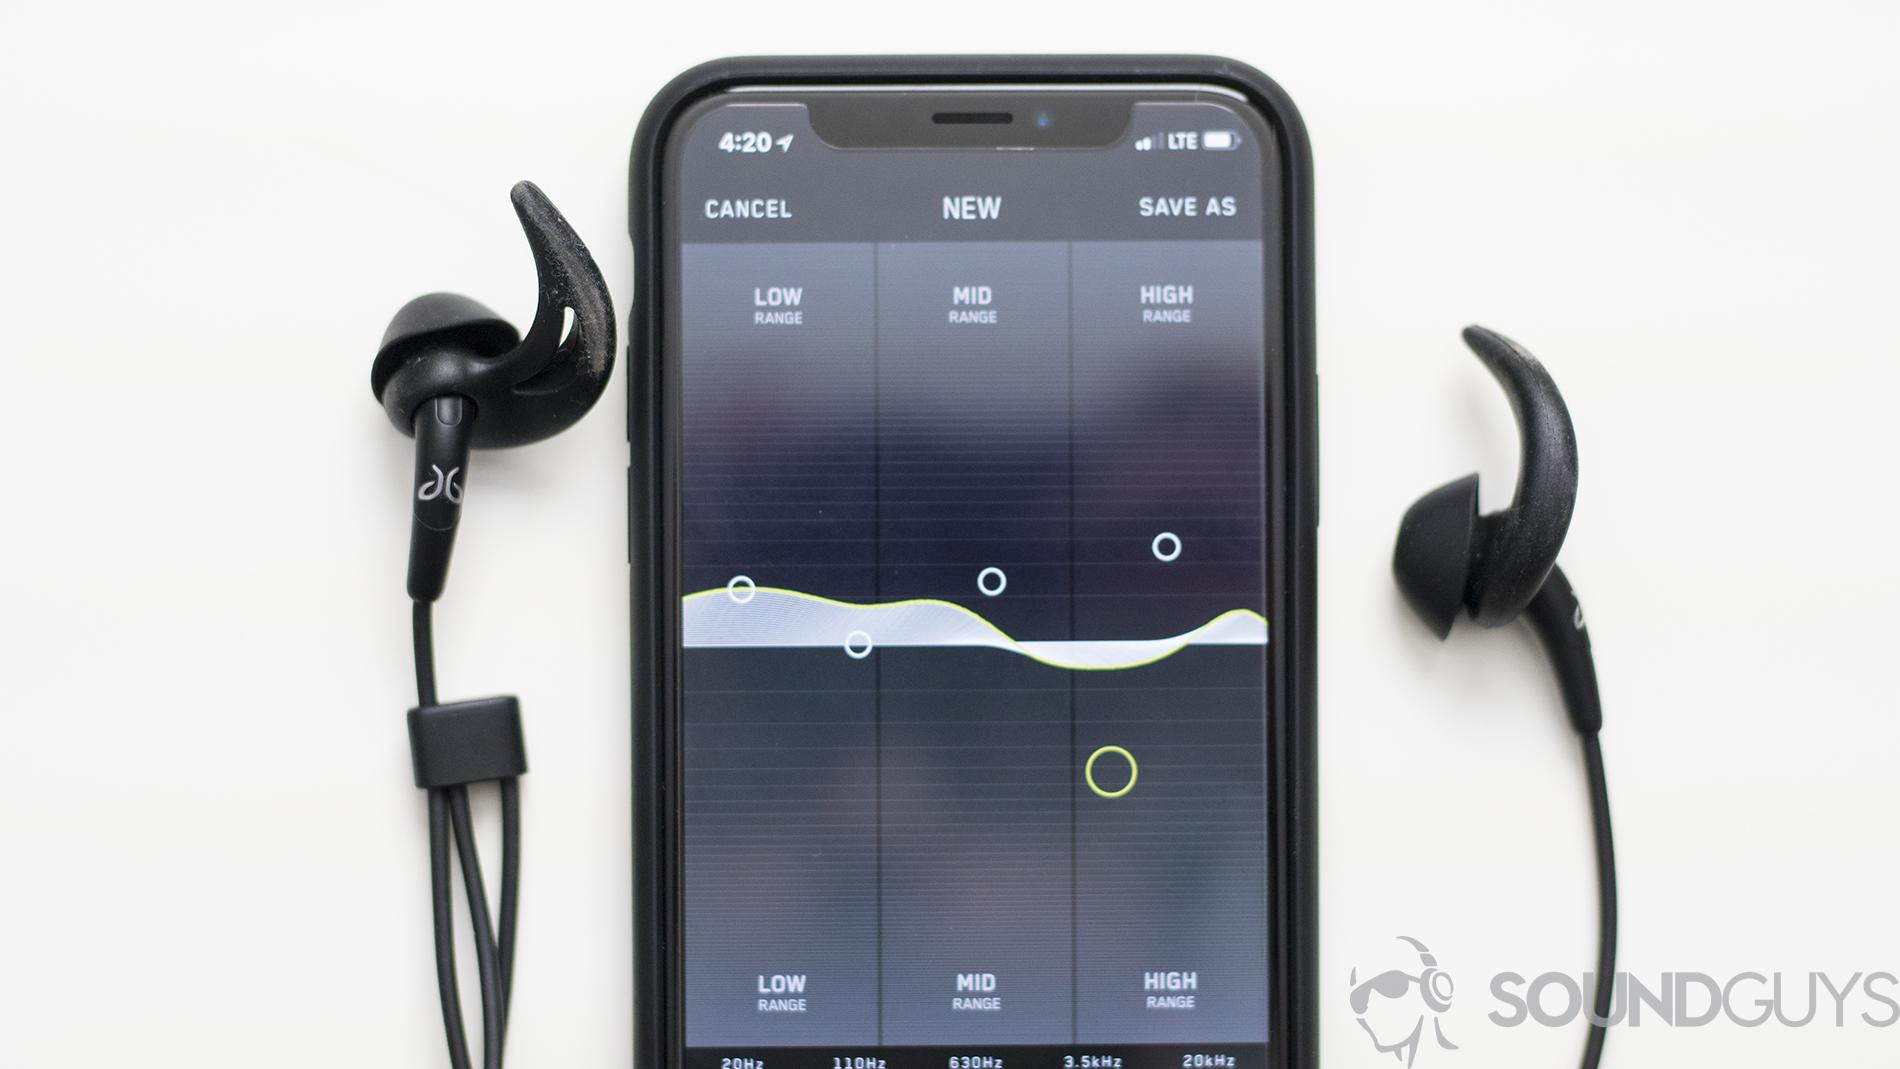 The Jaybird Freedom wireless earbuds and phone app.